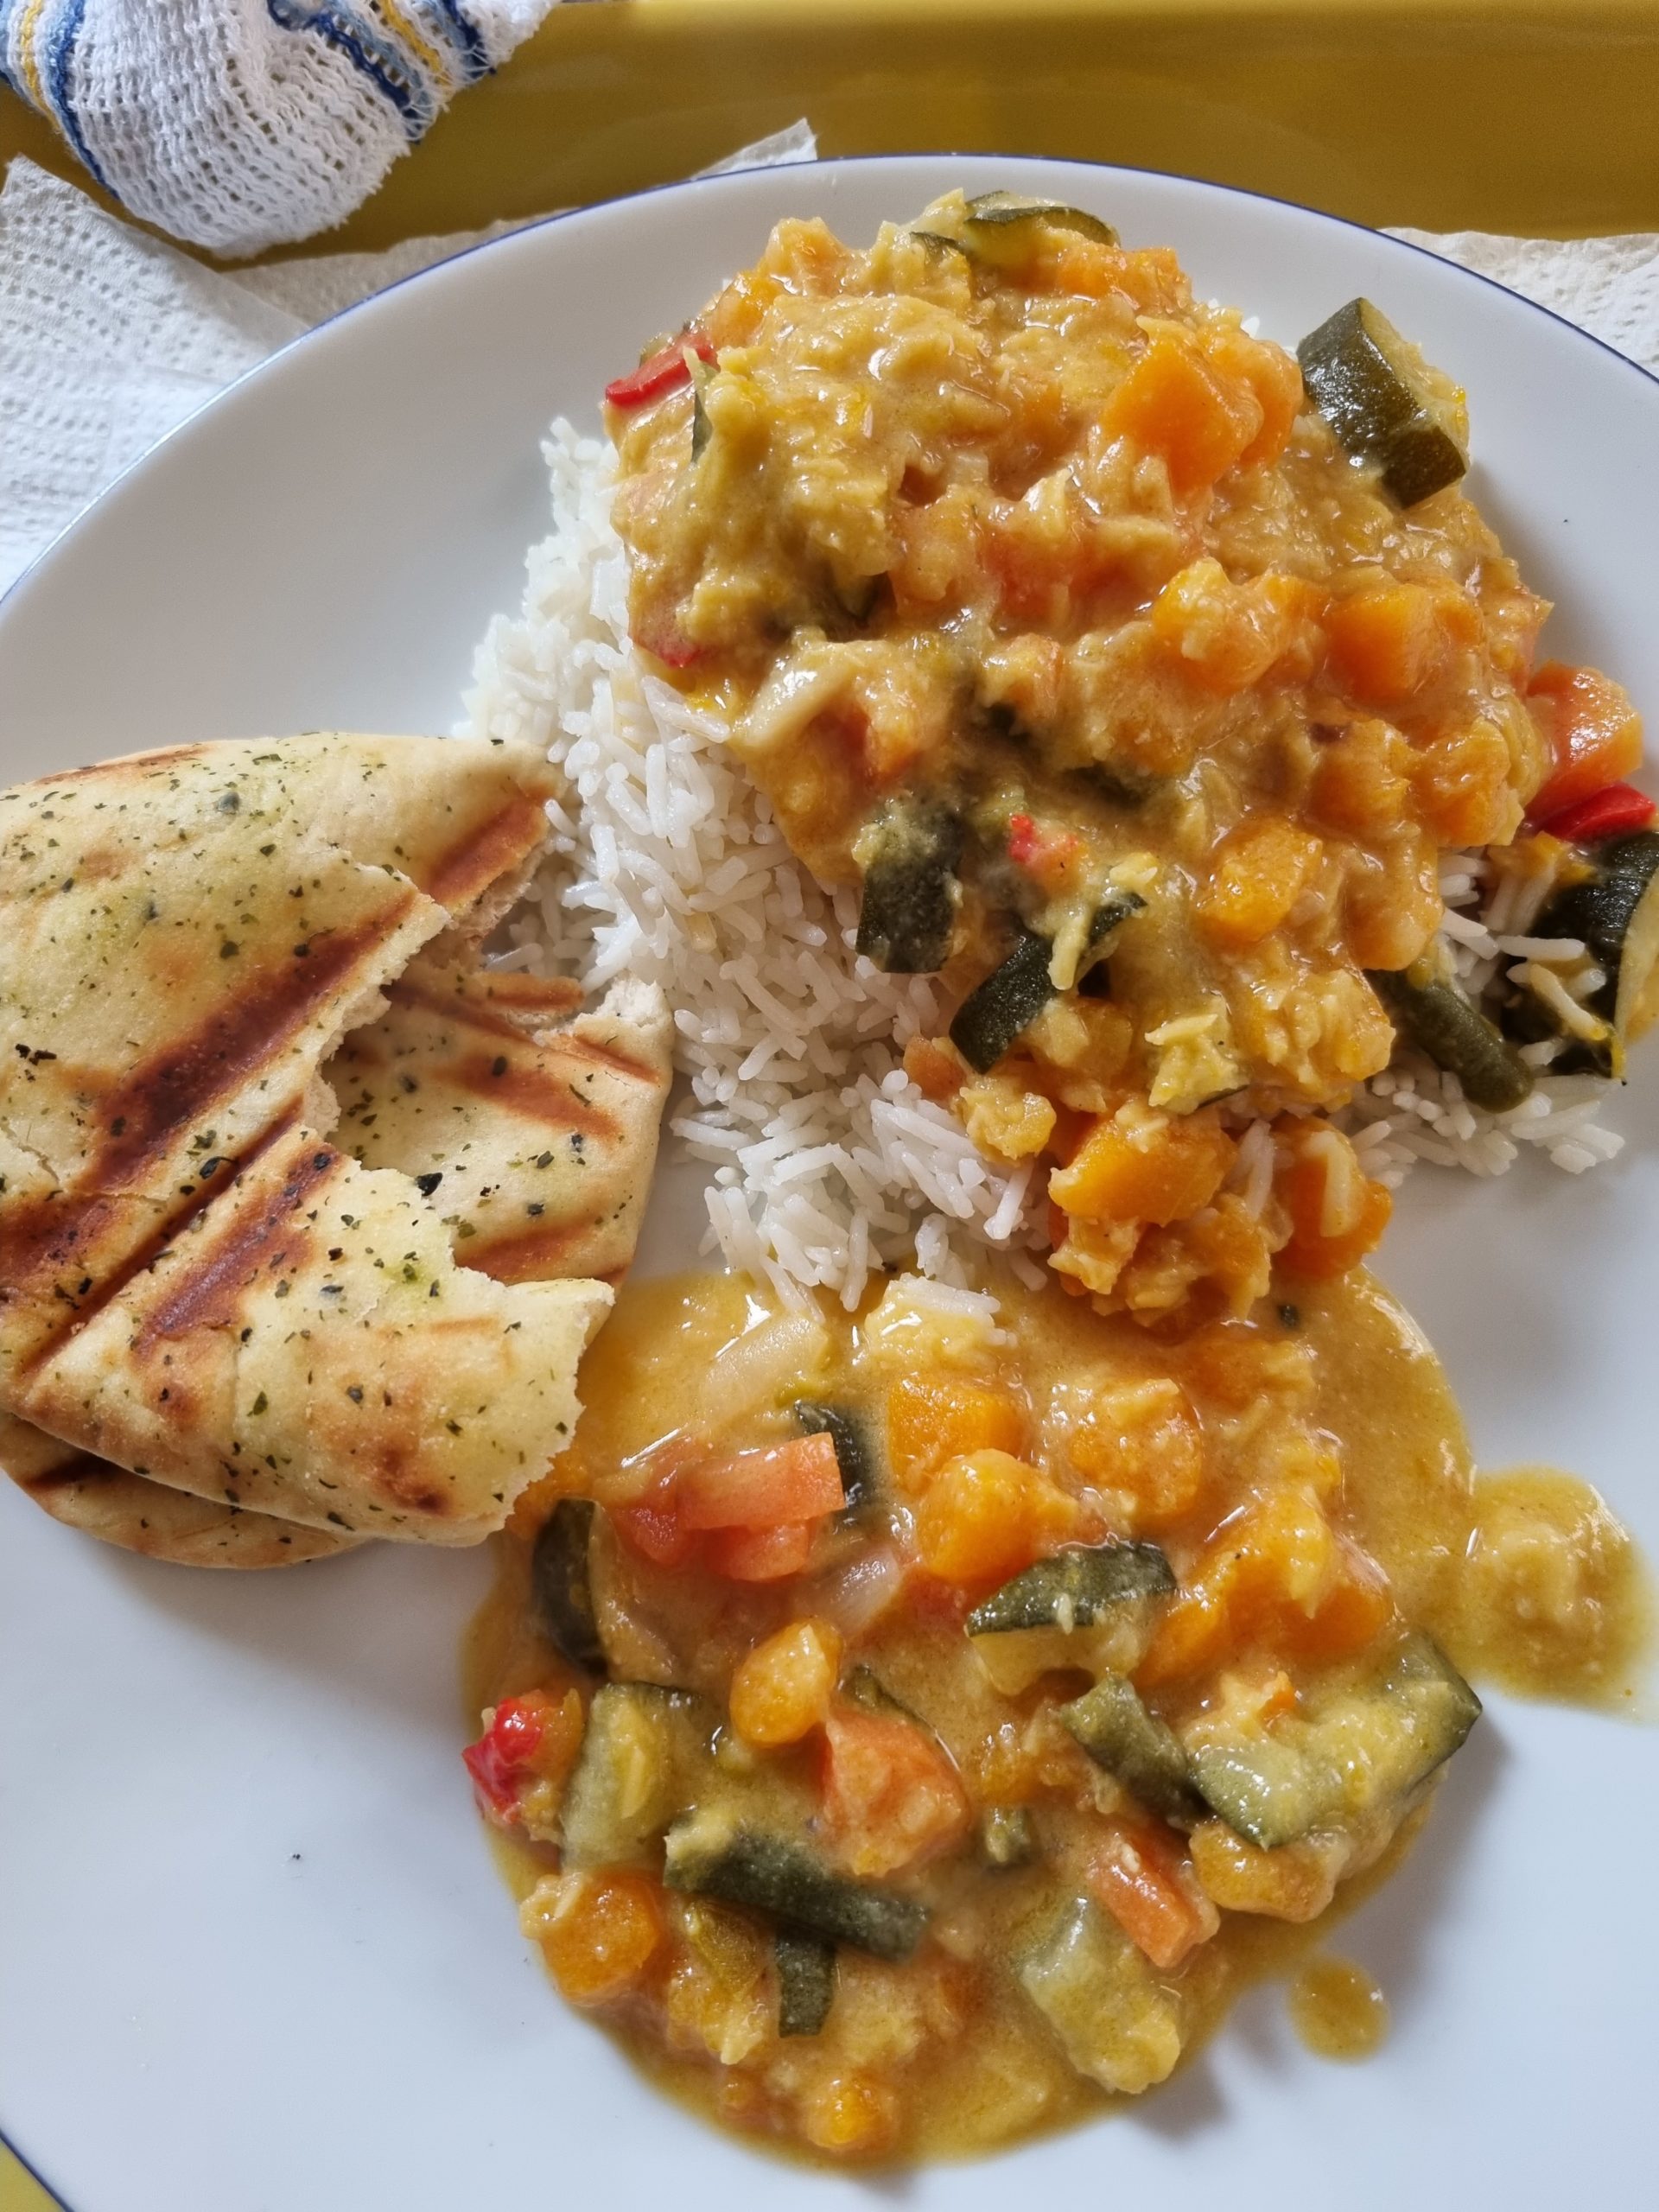 Veg sauce on a plate with rice and flatbread